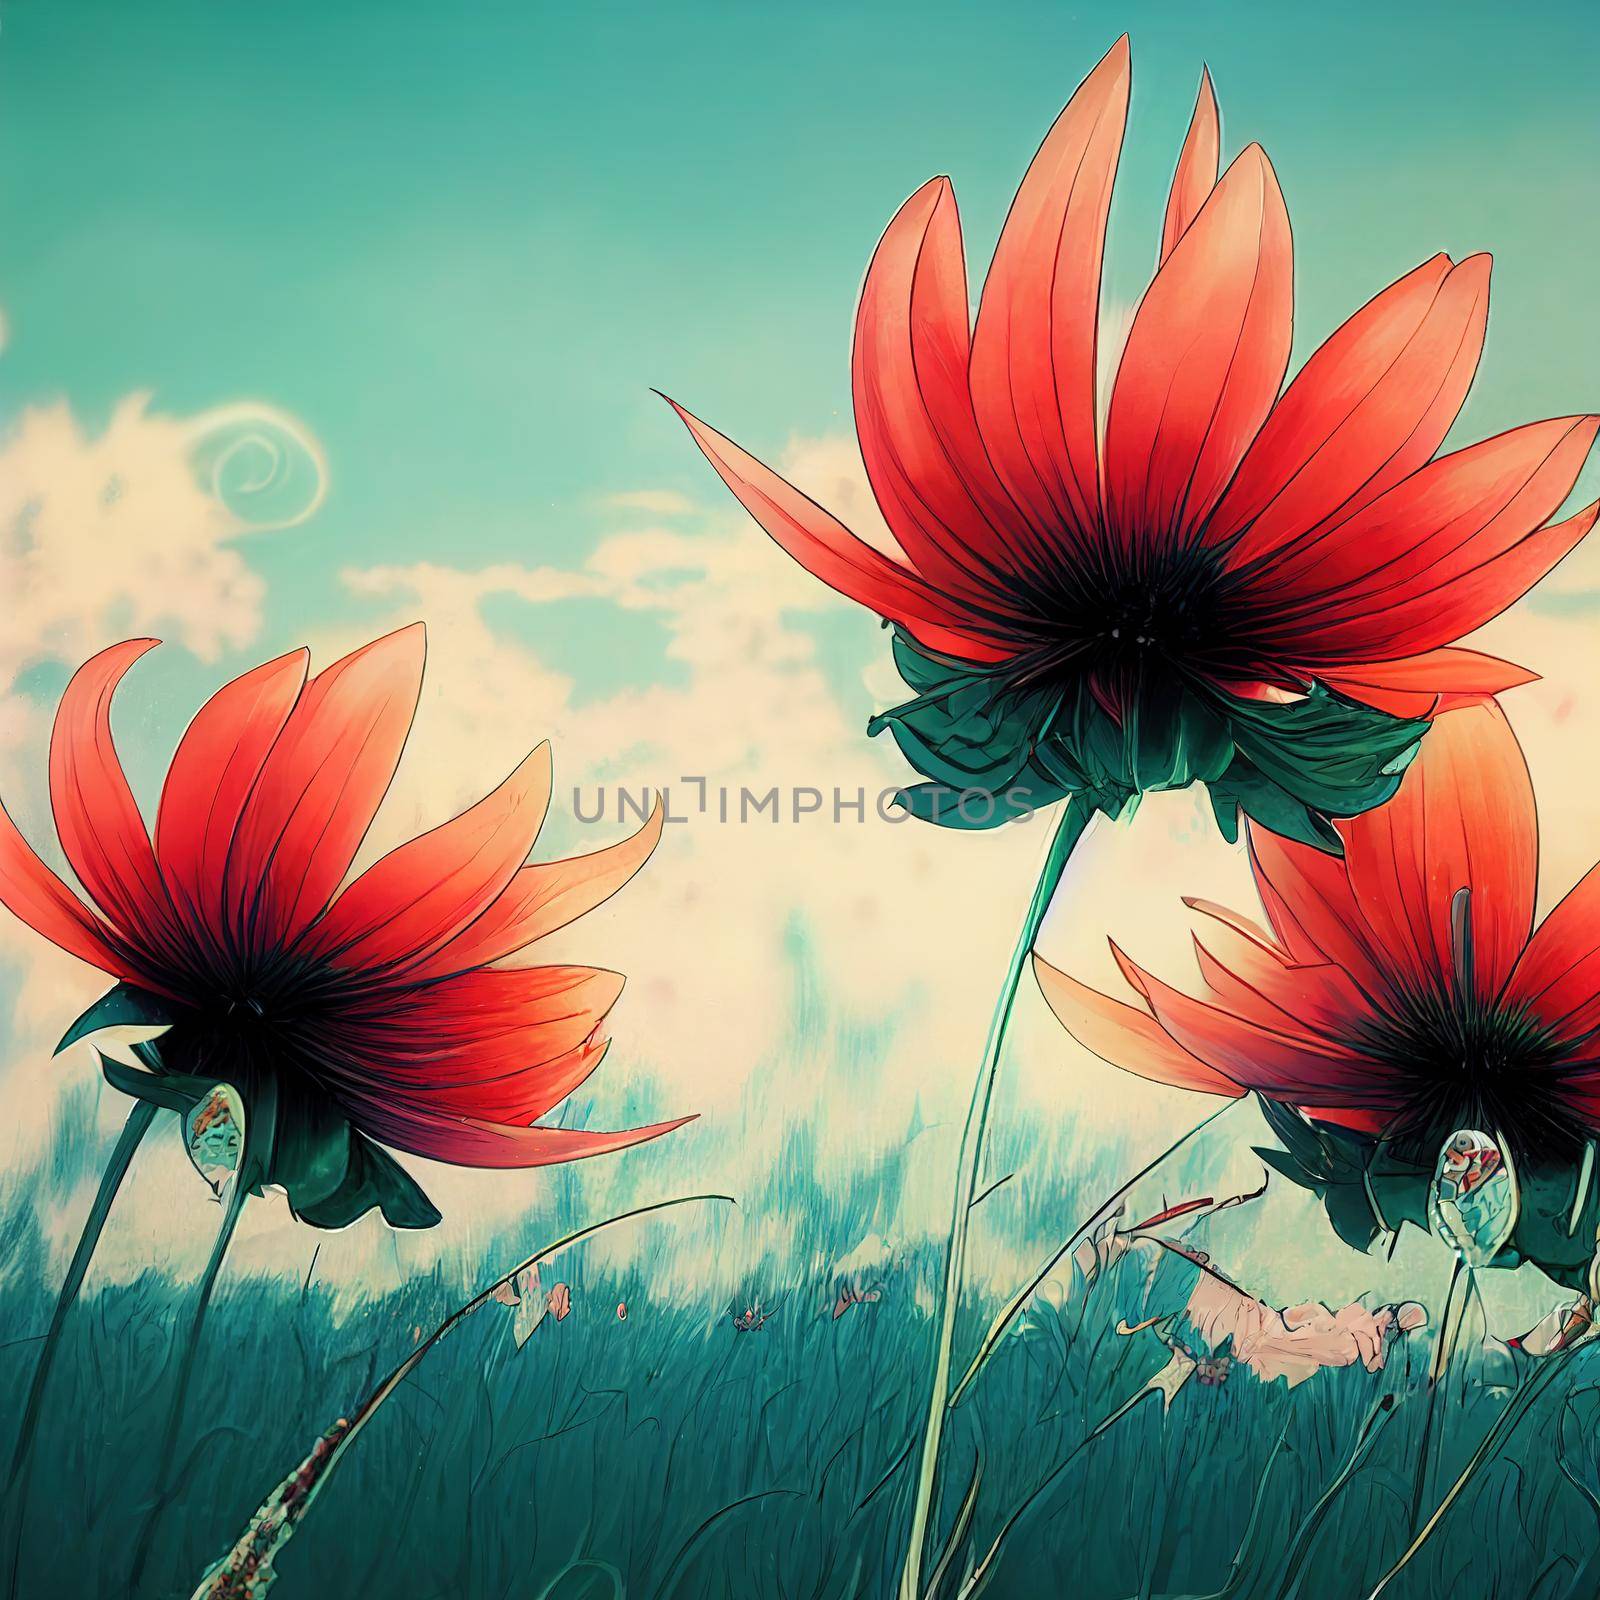 flowers anime style. High quality 3d illustration